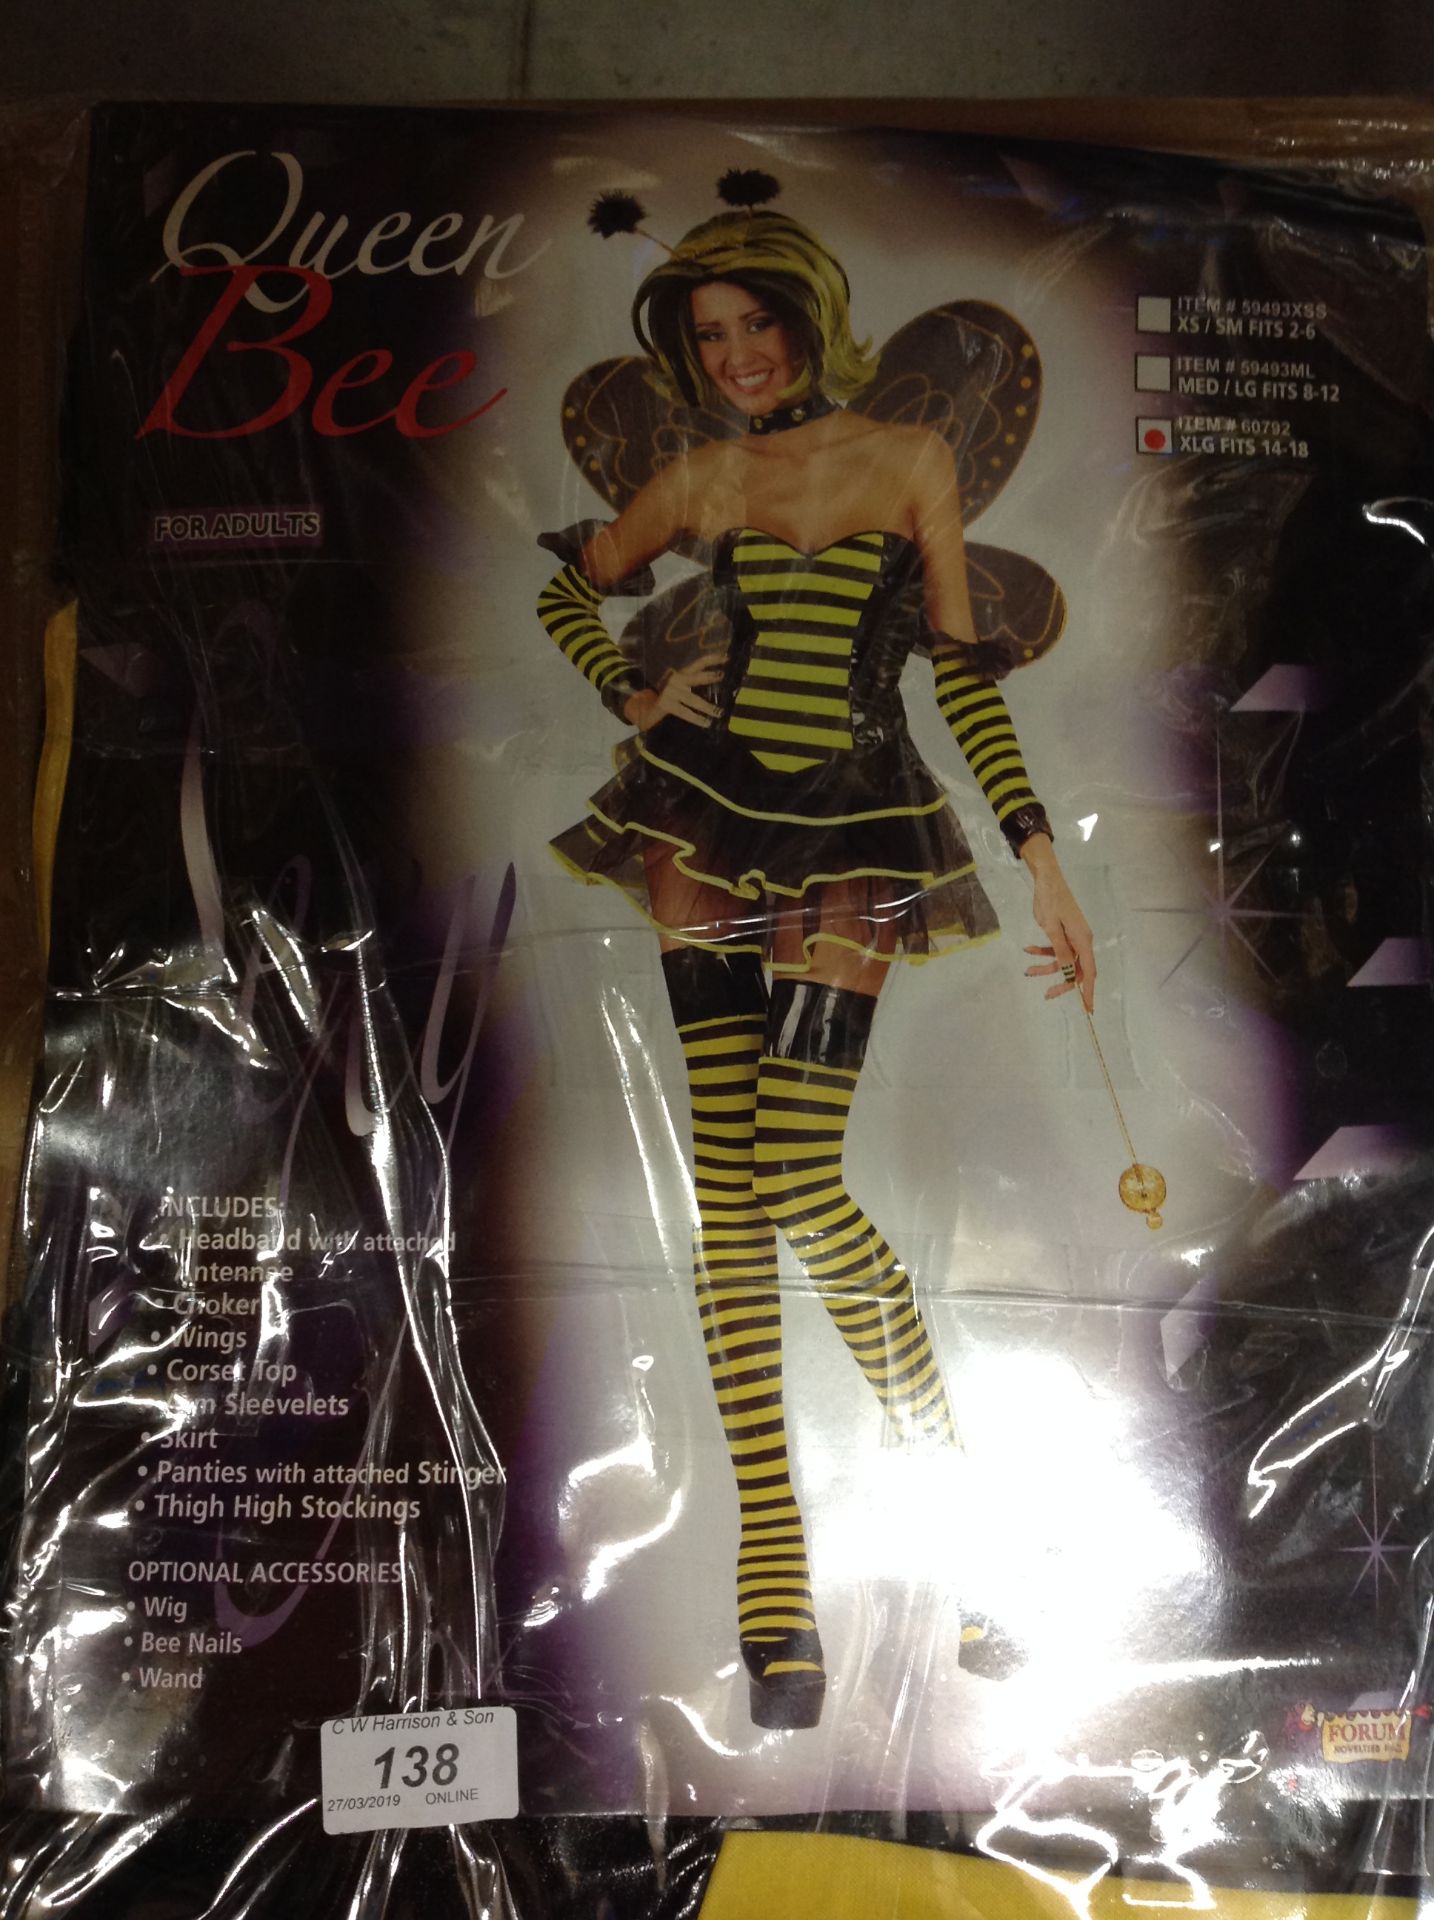 12 x adults queen bee costumes by Forum Novelties size L - please note blue crates are not included